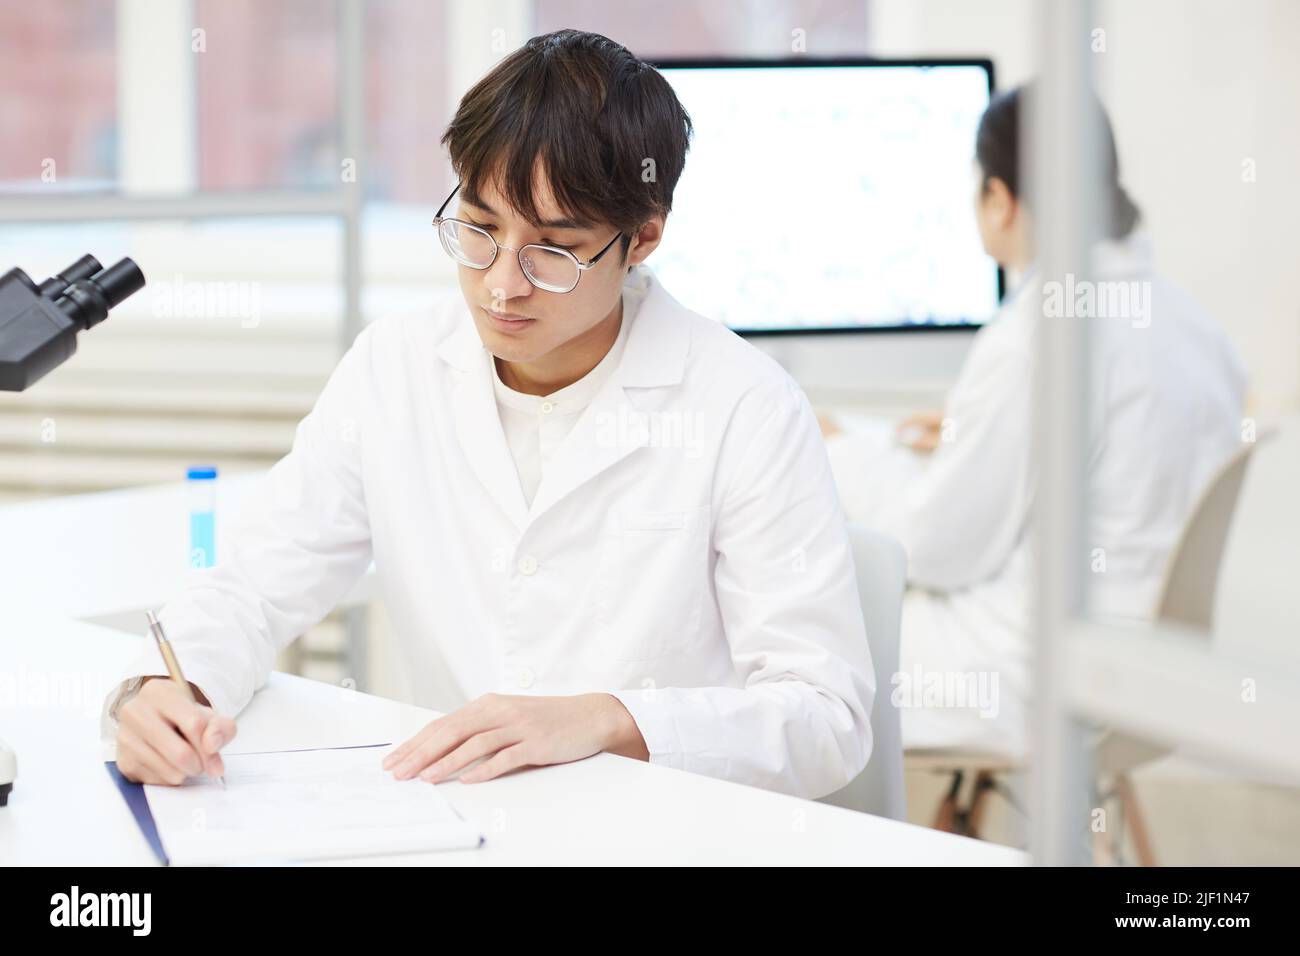 Serious concentrated young Asian lab technician in white coat and eyeglasses sitting at desk and making notes about laboratory research Stock Photo